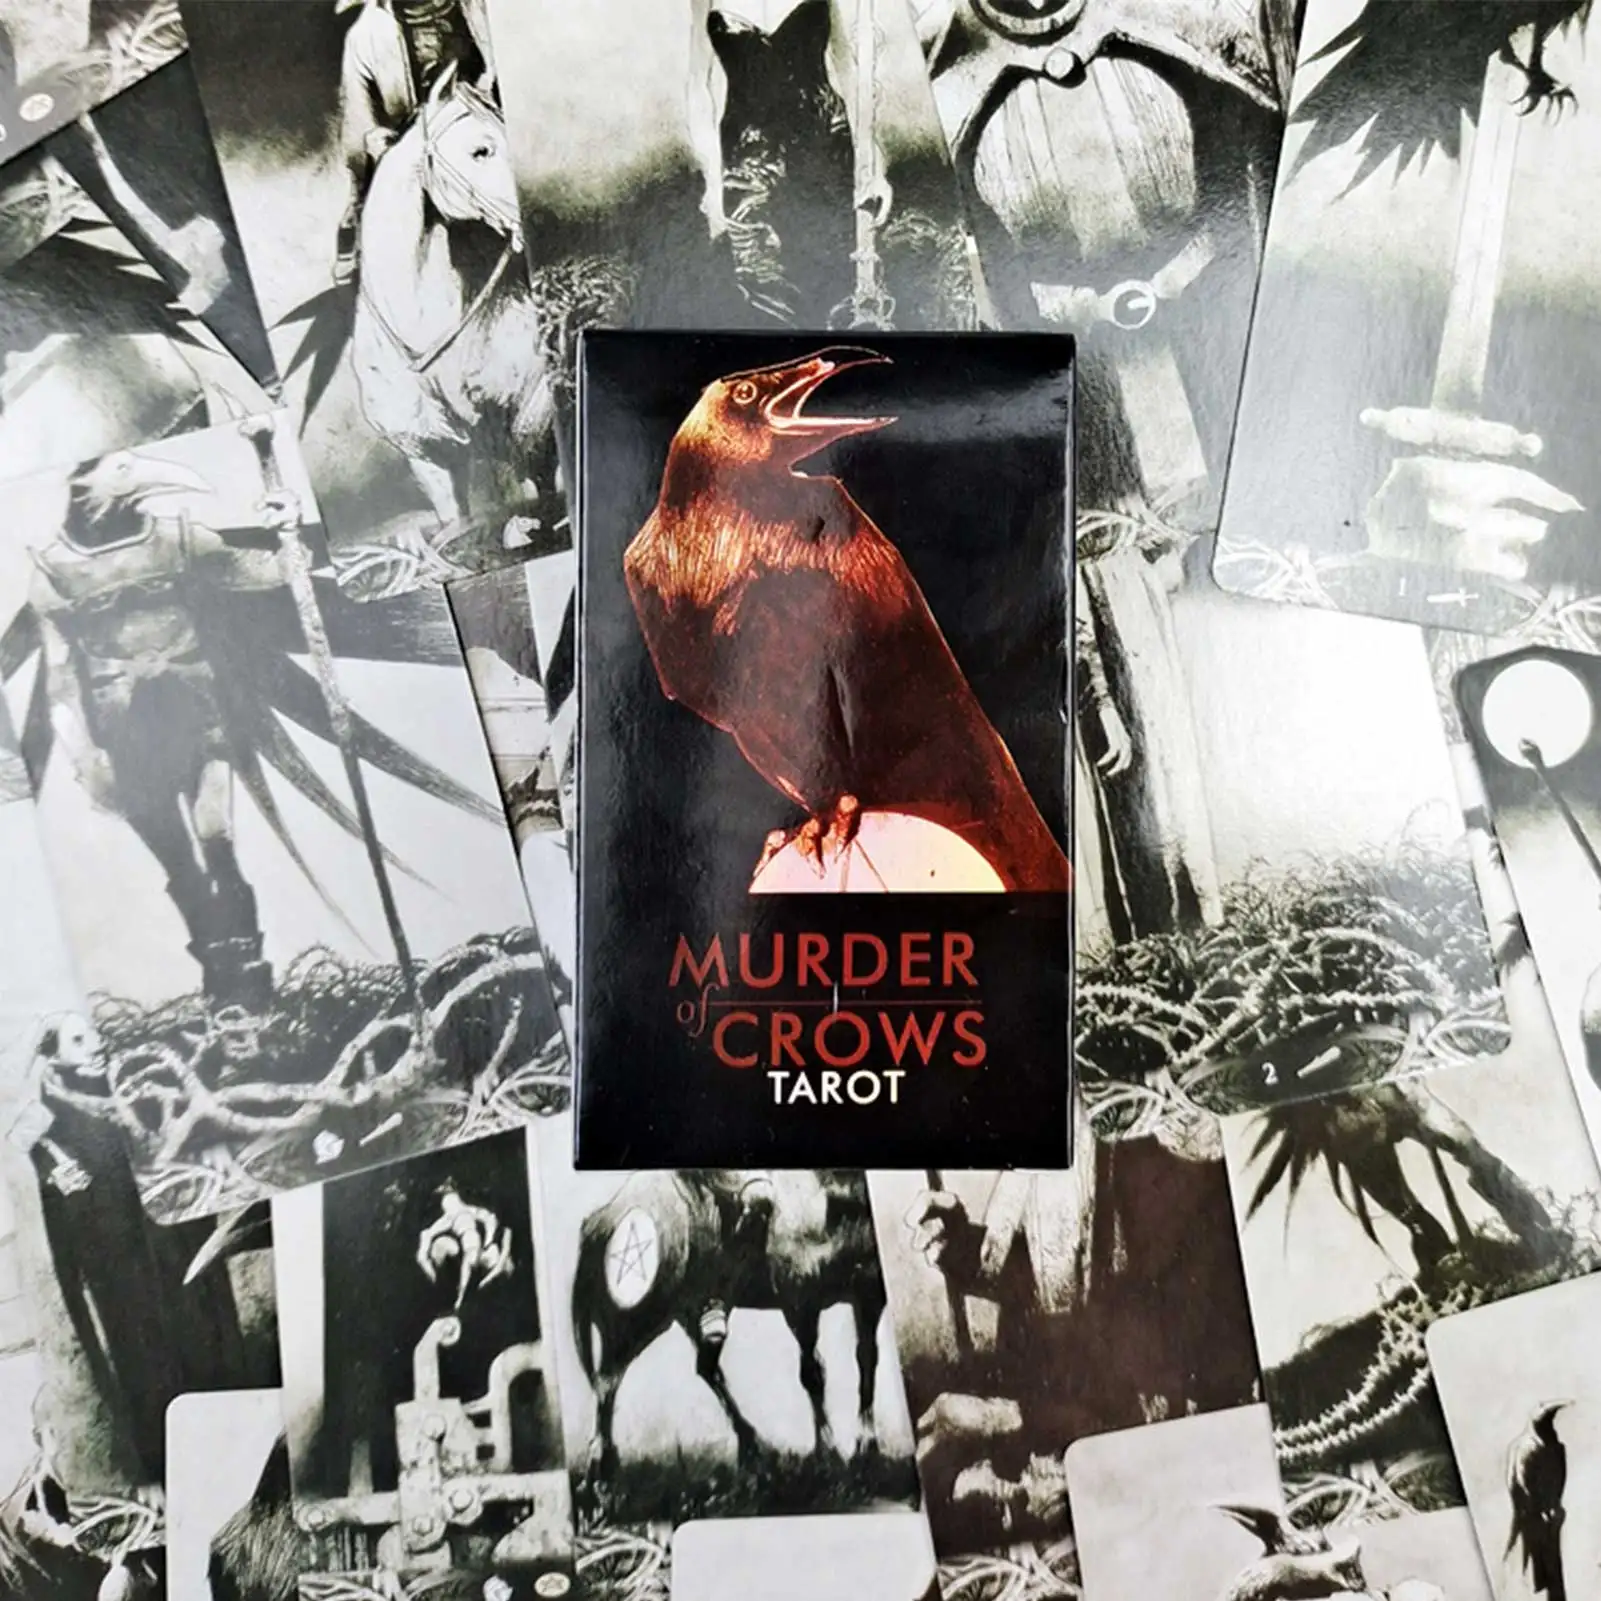 

Murder of Crows Tarot Cards Divination English Version Fortune Telling Tarot Cards Deck Friend Party Entertainment Board Game